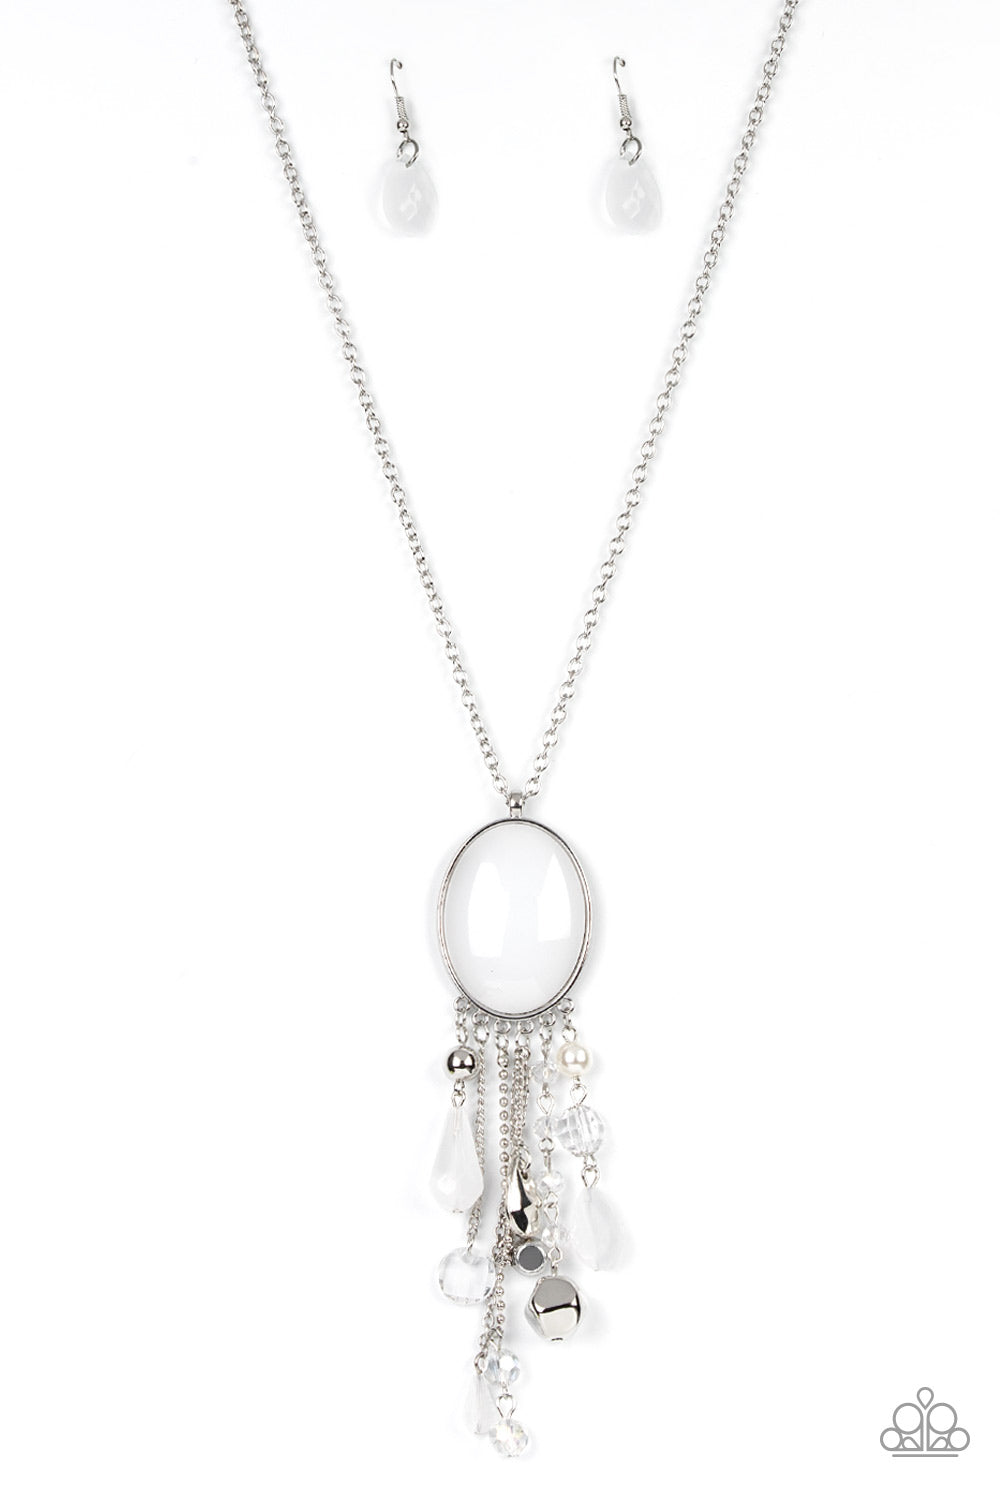 Whimsical Wishes - White Necklace - Paparazzi Accessories 